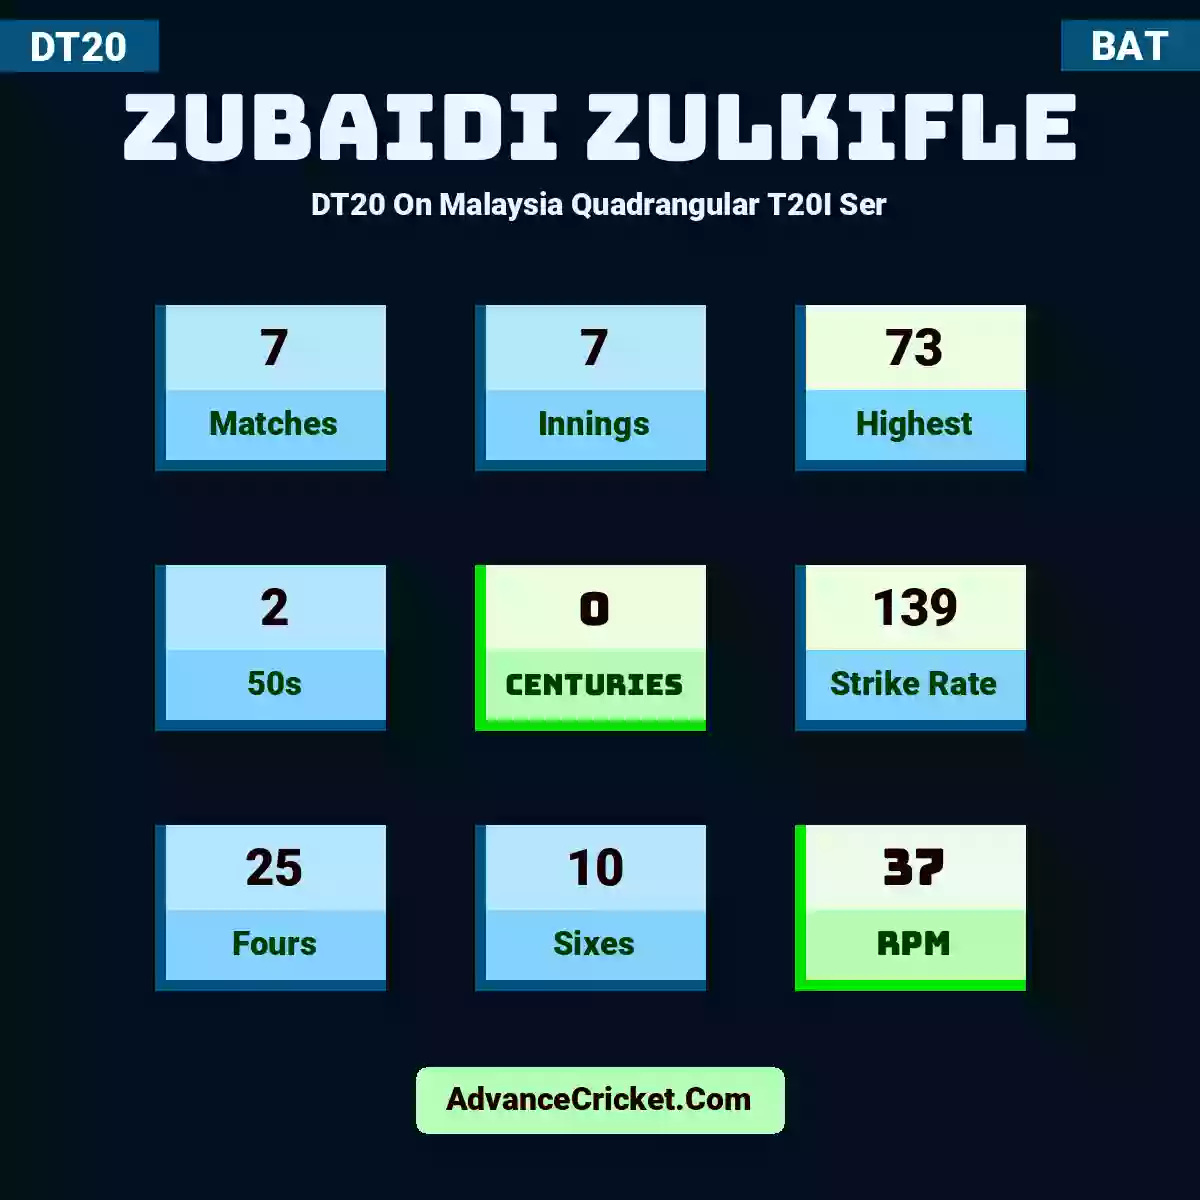 Zubaidi Zulkifle DT20  On Malaysia Quadrangular T20I Ser, Zubaidi Zulkifle played 7 matches, scored 73 runs as highest, 2 half-centuries, and 0 centuries, with a strike rate of 139. Z.Zulkifle hit 25 fours and 10 sixes, with an RPM of 37.